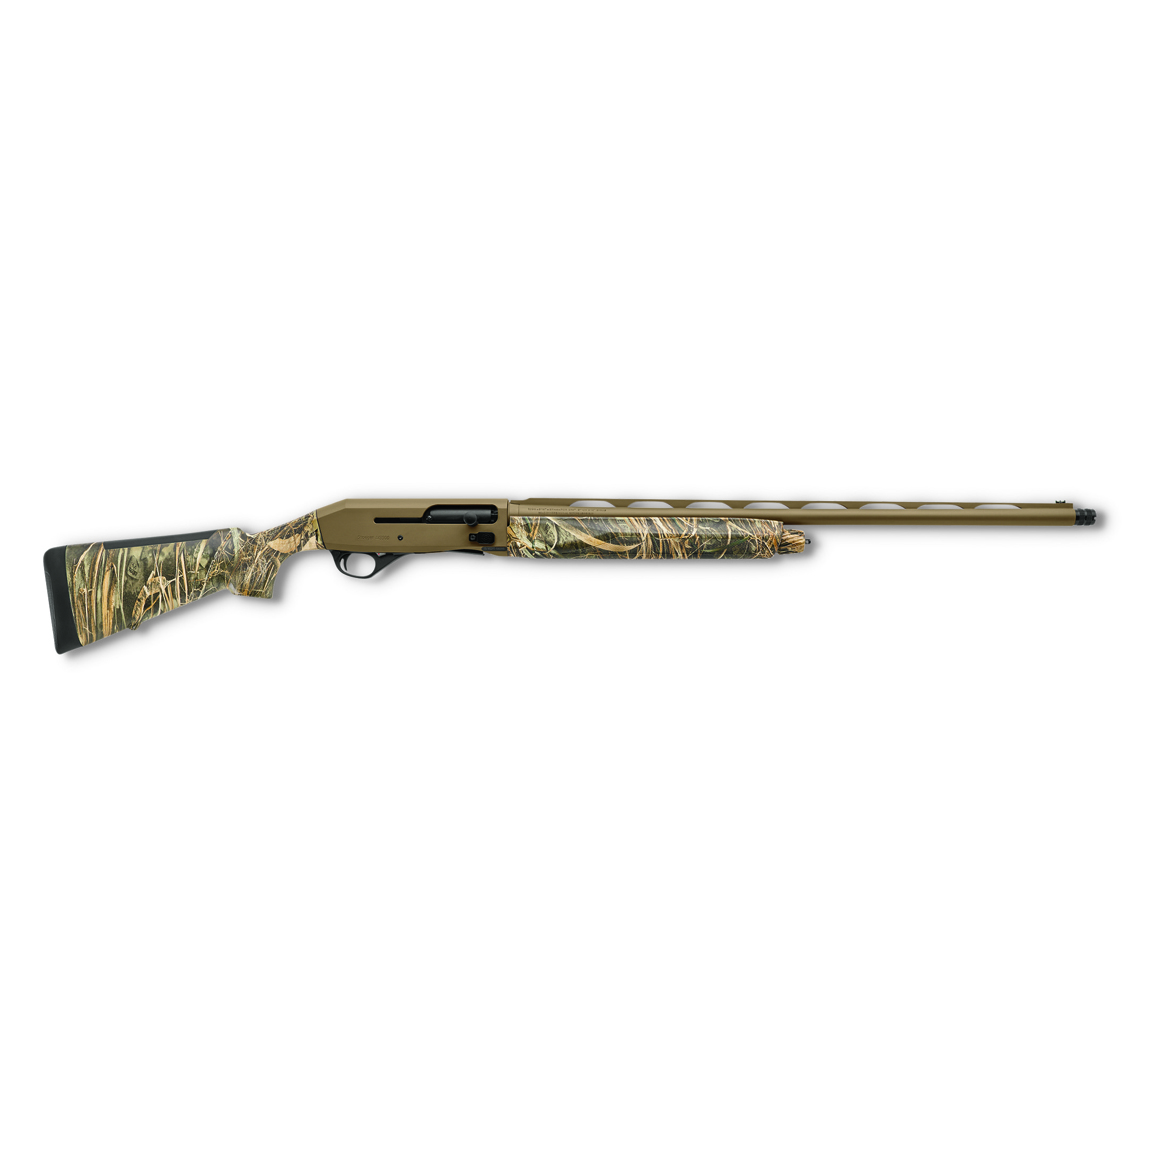 Stoeger M3500 Waterfowl Special, Semi-automatic, 12 Gauge, 28" Barrel, Realtree MAX-7, 4+1 Rounds